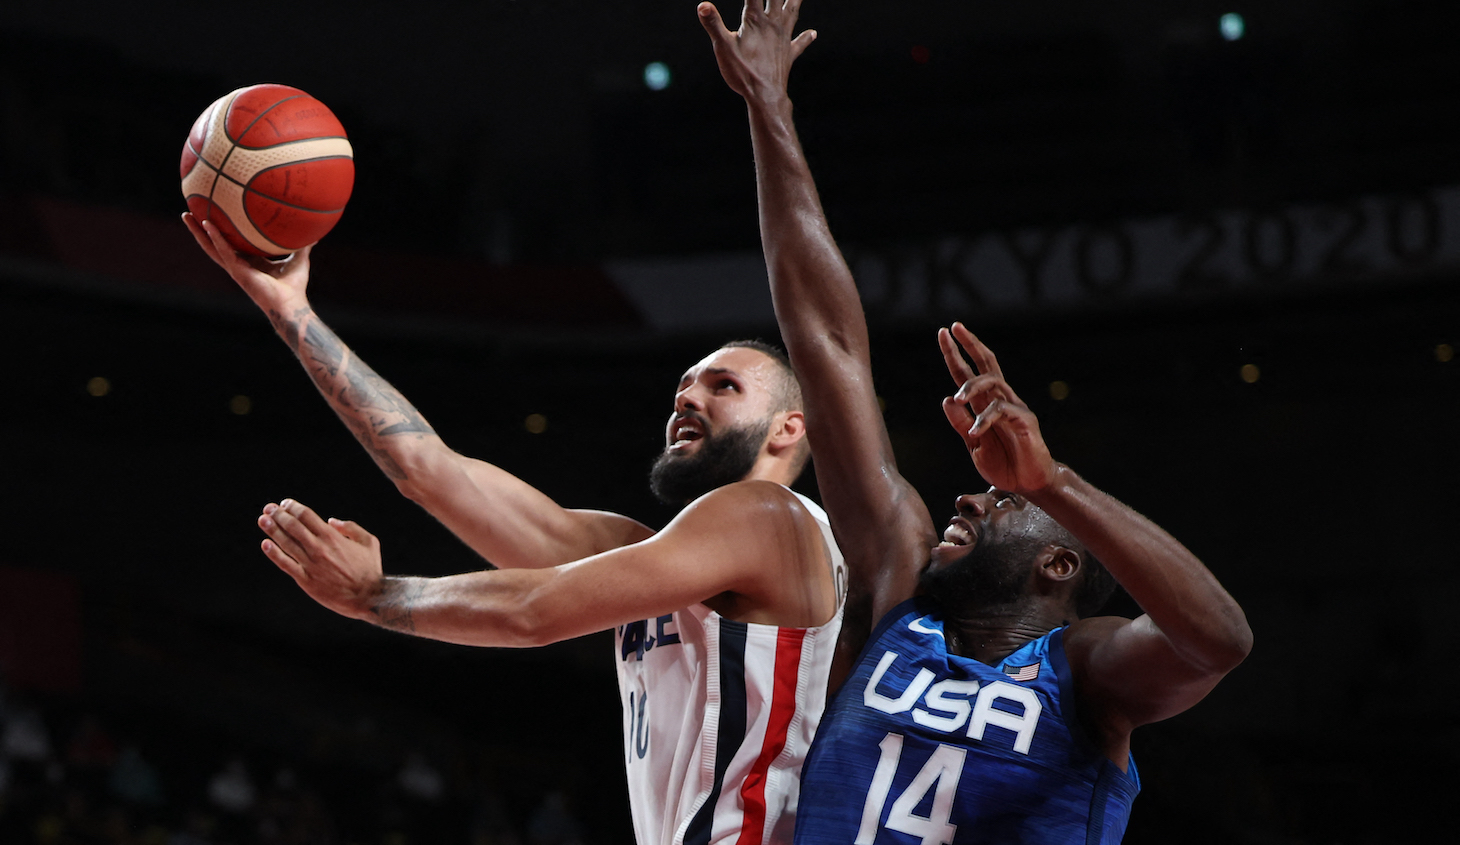 TOPSHOT - France's Evan Fournier (L) goes to the basket as USA's Draymond Jamal Green tries to block in the men's preliminary round group A basketball match between France and USA during the Tokyo 2020 Olympic Games at the Saitama Super Arena in Saitama on July 25, 2021. (Photo by Thomas COEX / AFP) (Photo by THOMAS COEX/AFP via Getty Images)